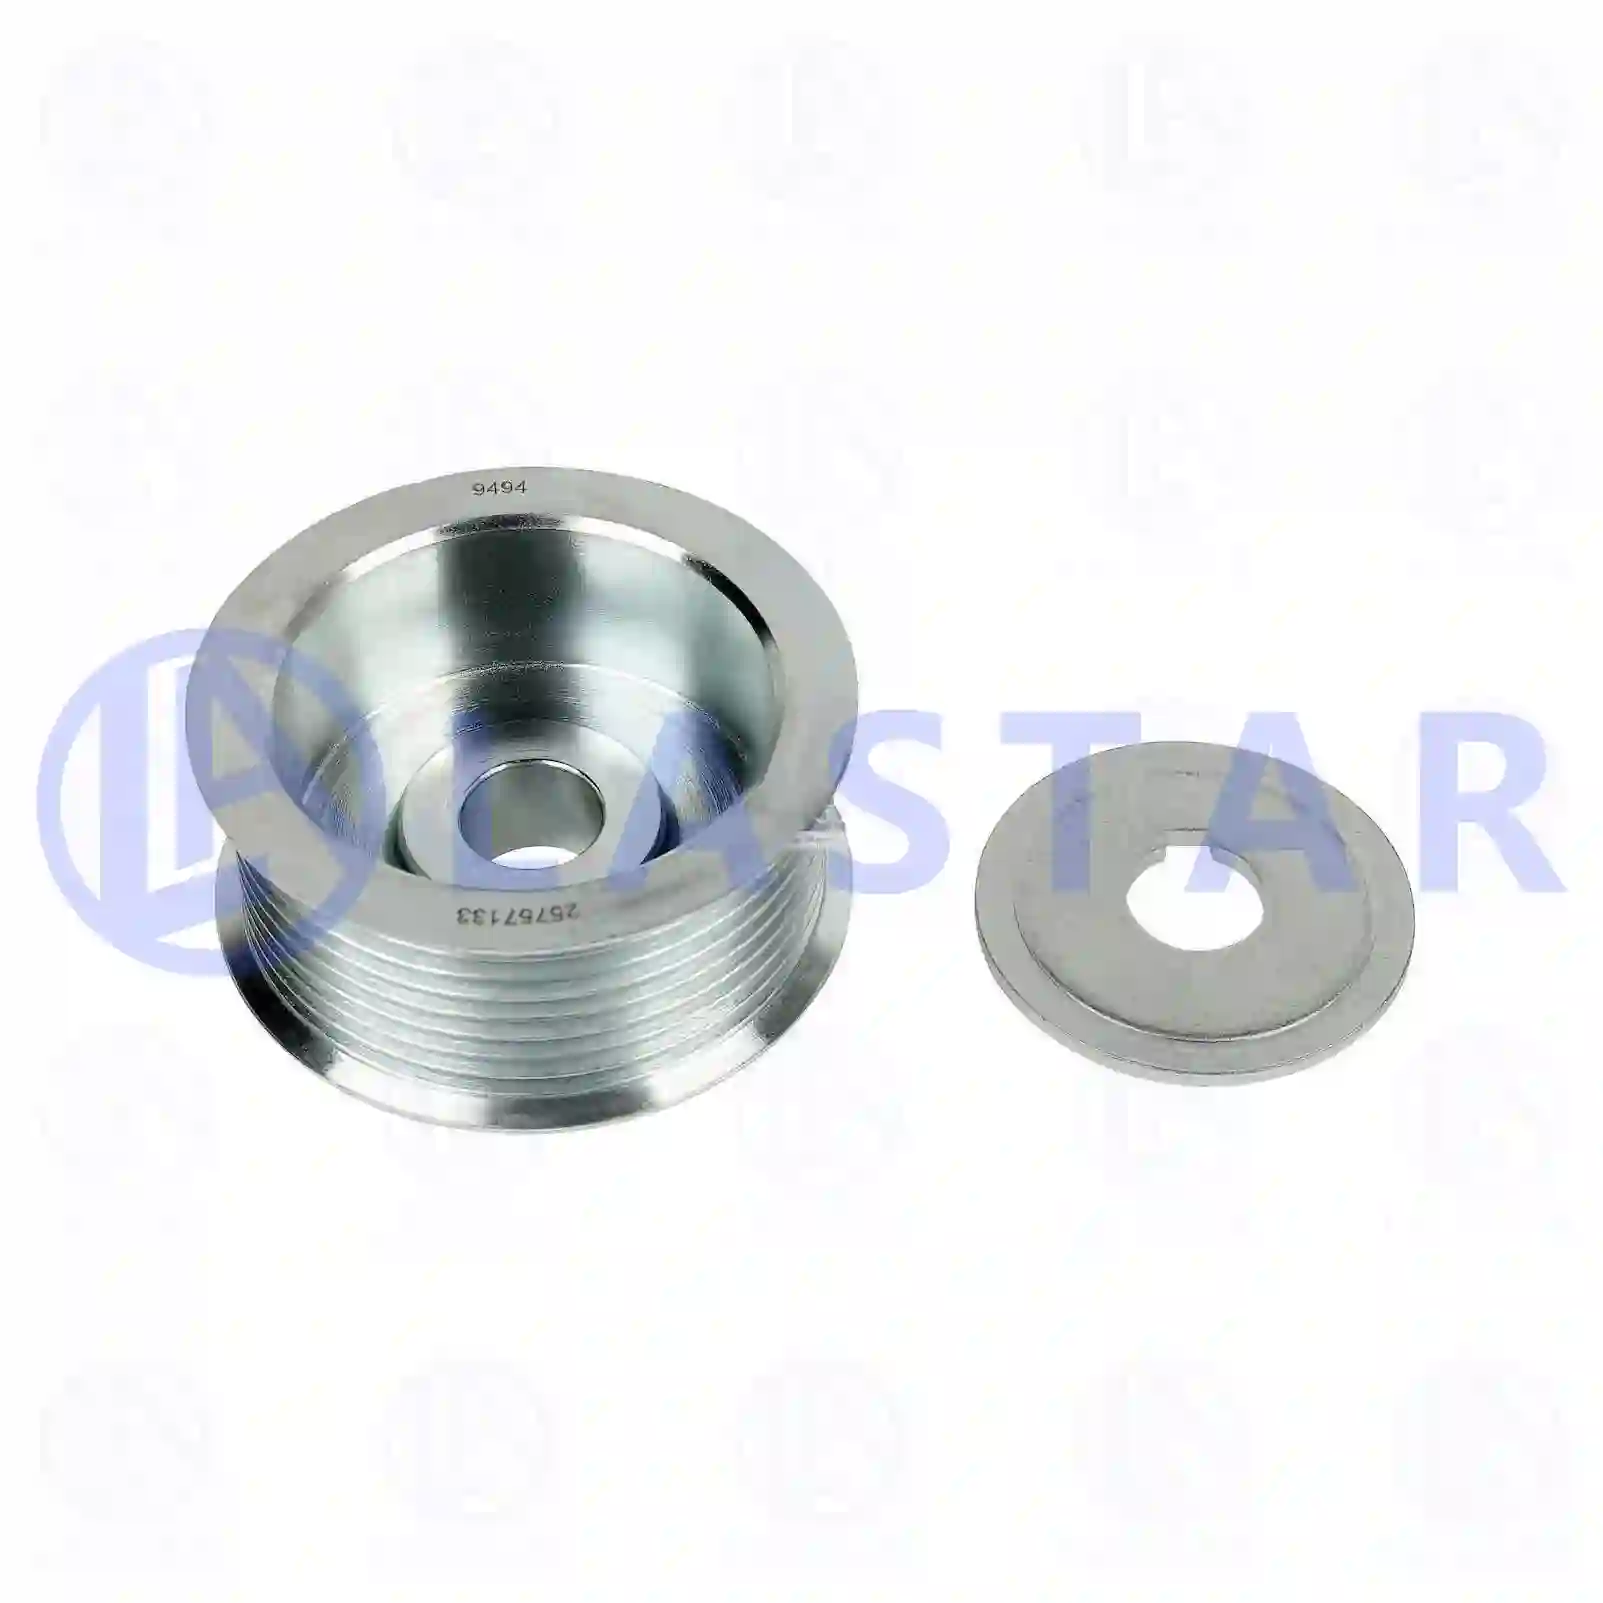 Pulley, 77711778, 0011552115, , , ||  77711778 Lastar Spare Part | Truck Spare Parts, Auotomotive Spare Parts Pulley, 77711778, 0011552115, , , ||  77711778 Lastar Spare Part | Truck Spare Parts, Auotomotive Spare Parts